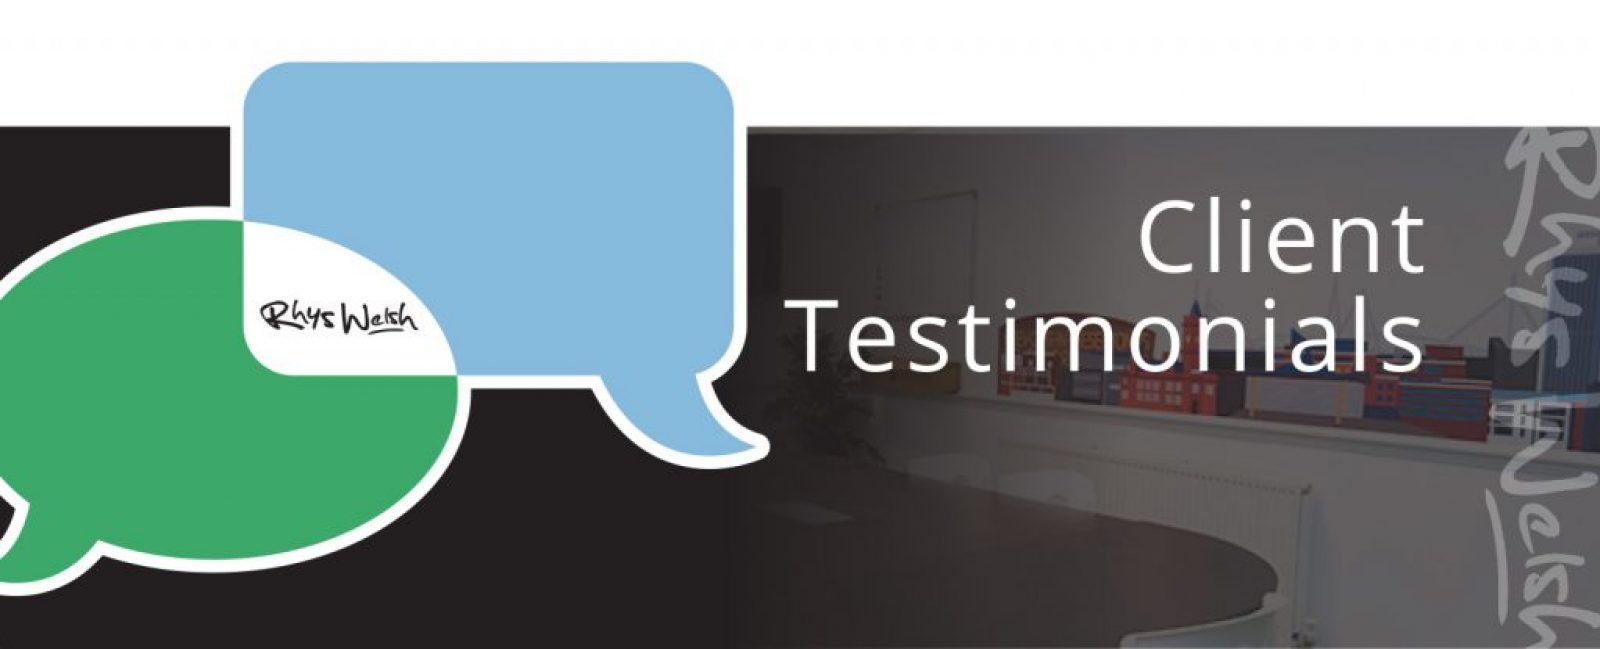 Clients-Testimonials-Web-Design-for-cardiff